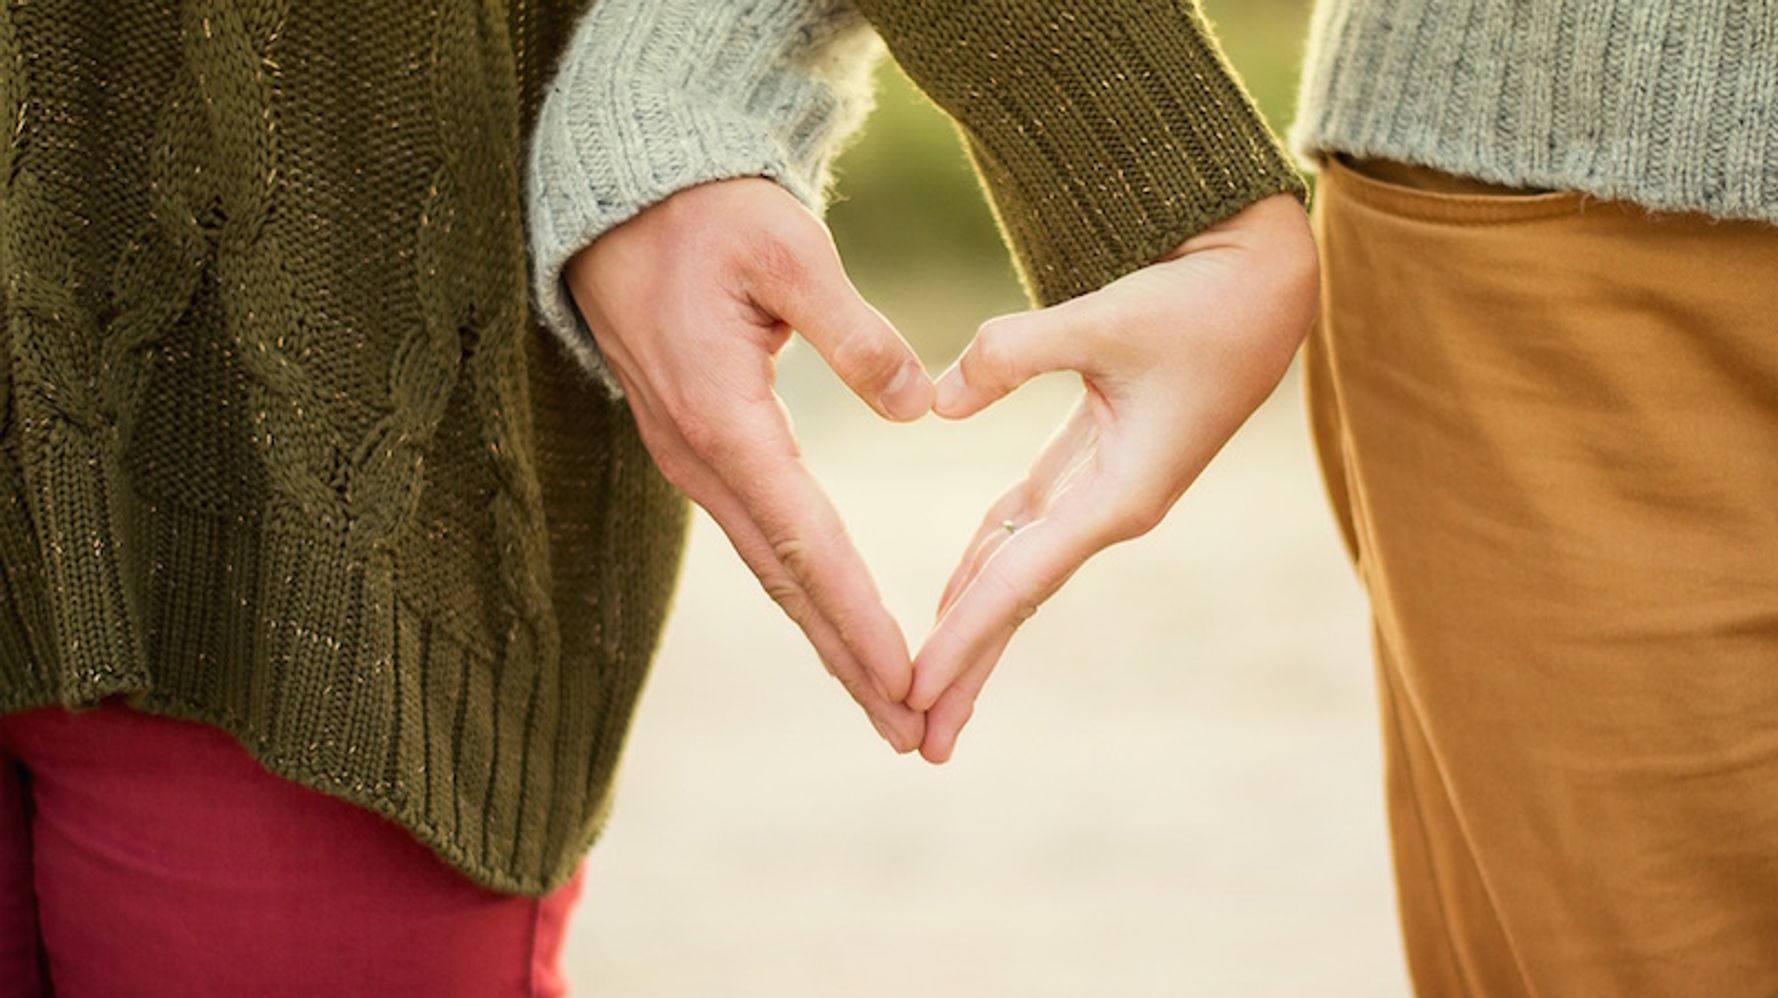 10 Signs You Have Connected With A Soulmate | HuffPost Life